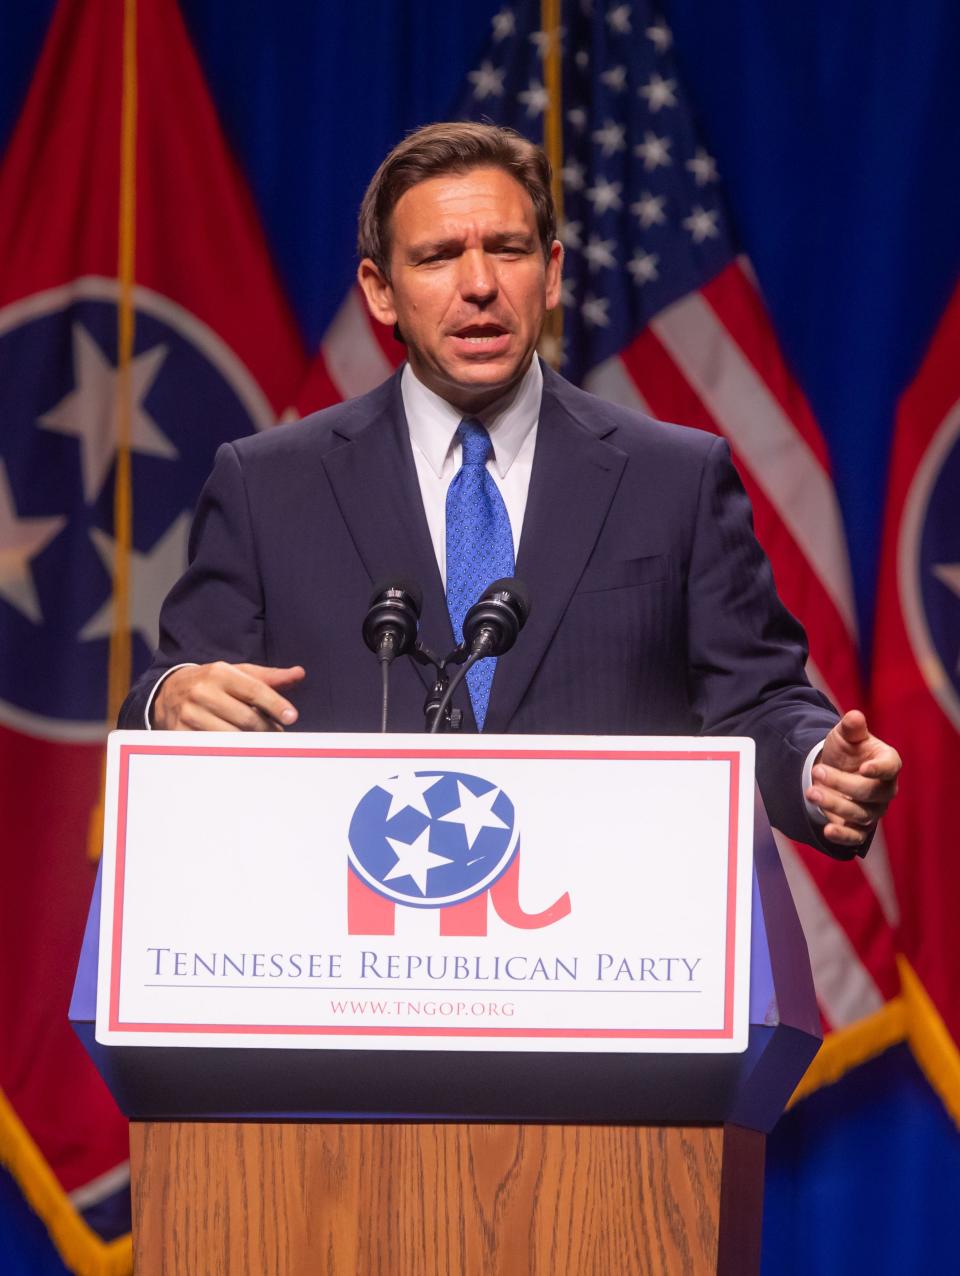 Florida Gov. Ron DeSantis speaks at the Tennessee Republican Party’s Statesmen's Dinner on Saturday, July 15, 2023 at Music City Center.